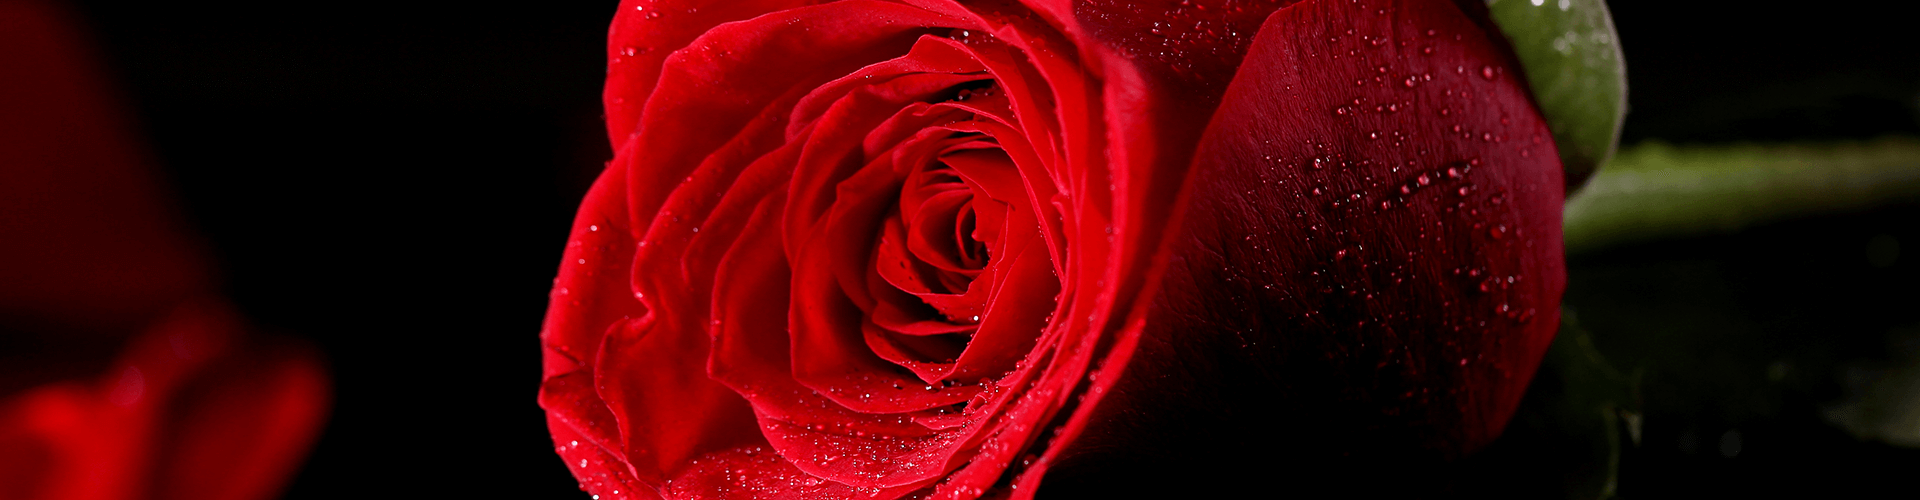 red-rose-darkness (1)